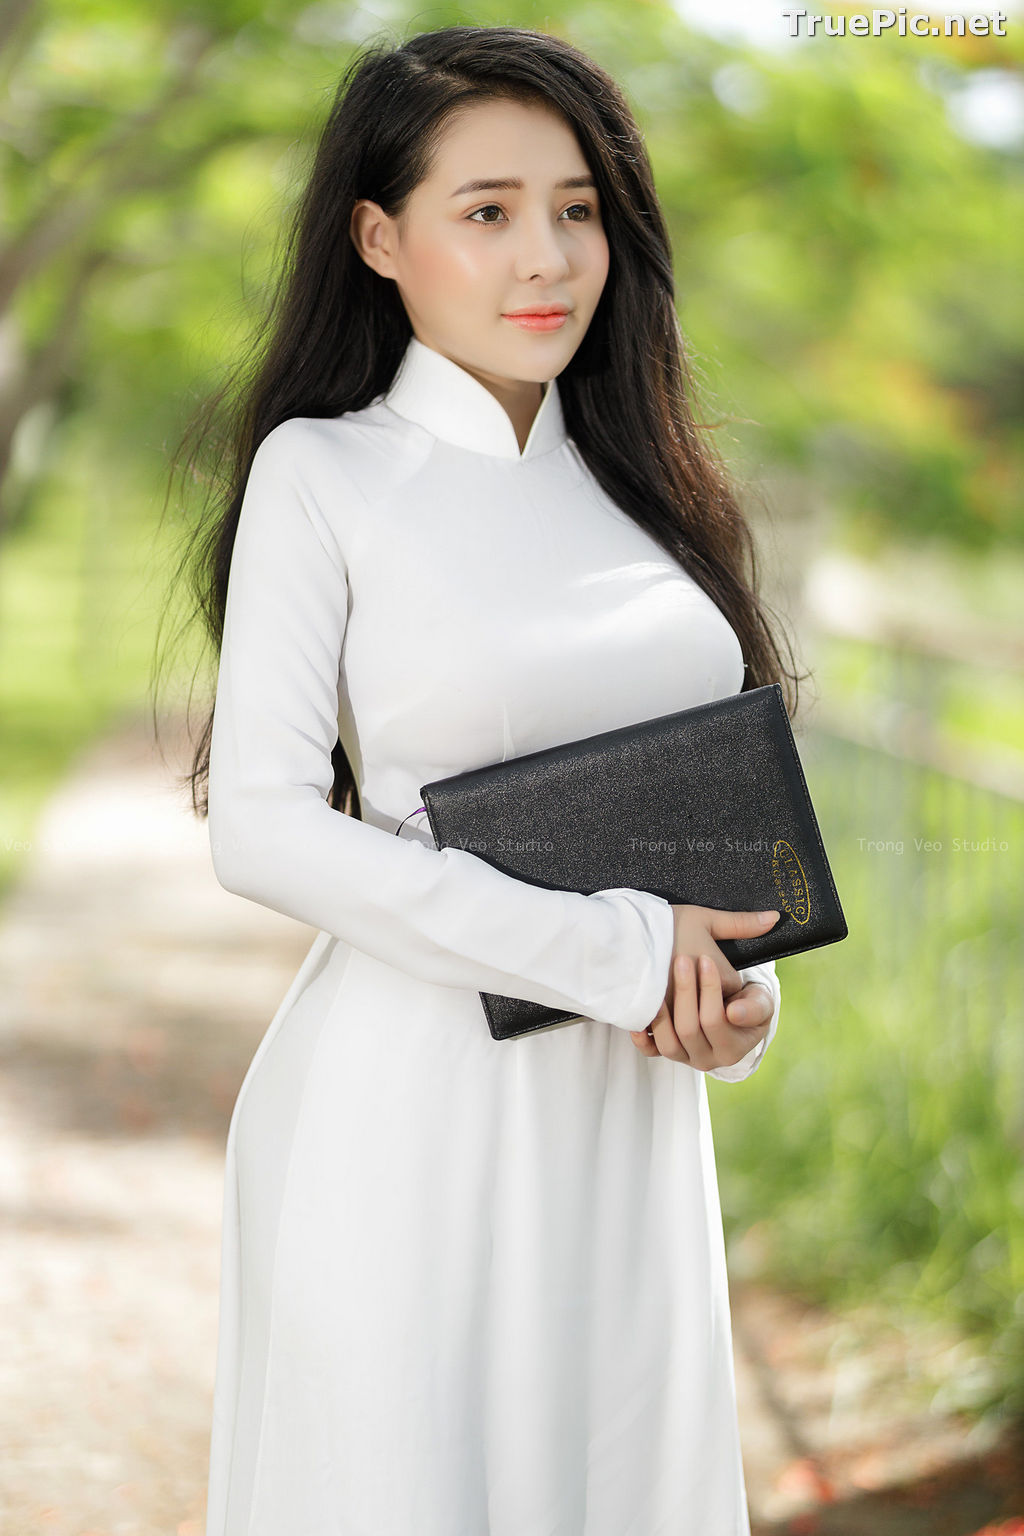 Image The Beauty of Vietnamese Girls with Traditional Dress (Ao Dai) #1 - TruePic.net - Picture-66